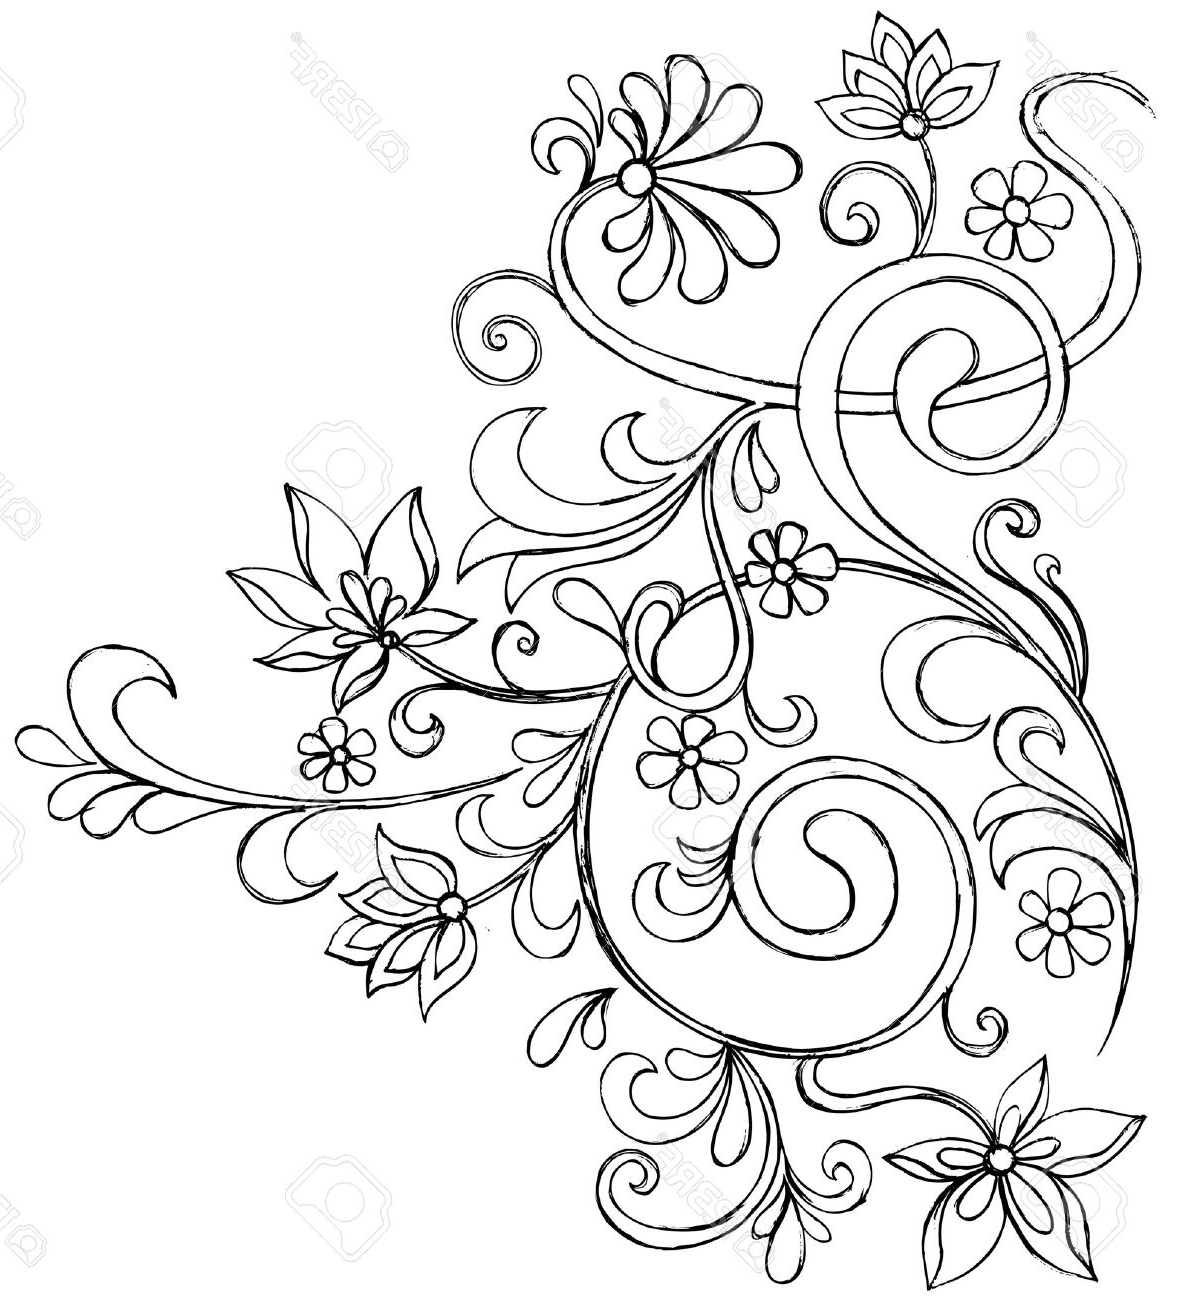 Simple Flower Vines Drawing Flower Tattoos For Your Waist Carisca